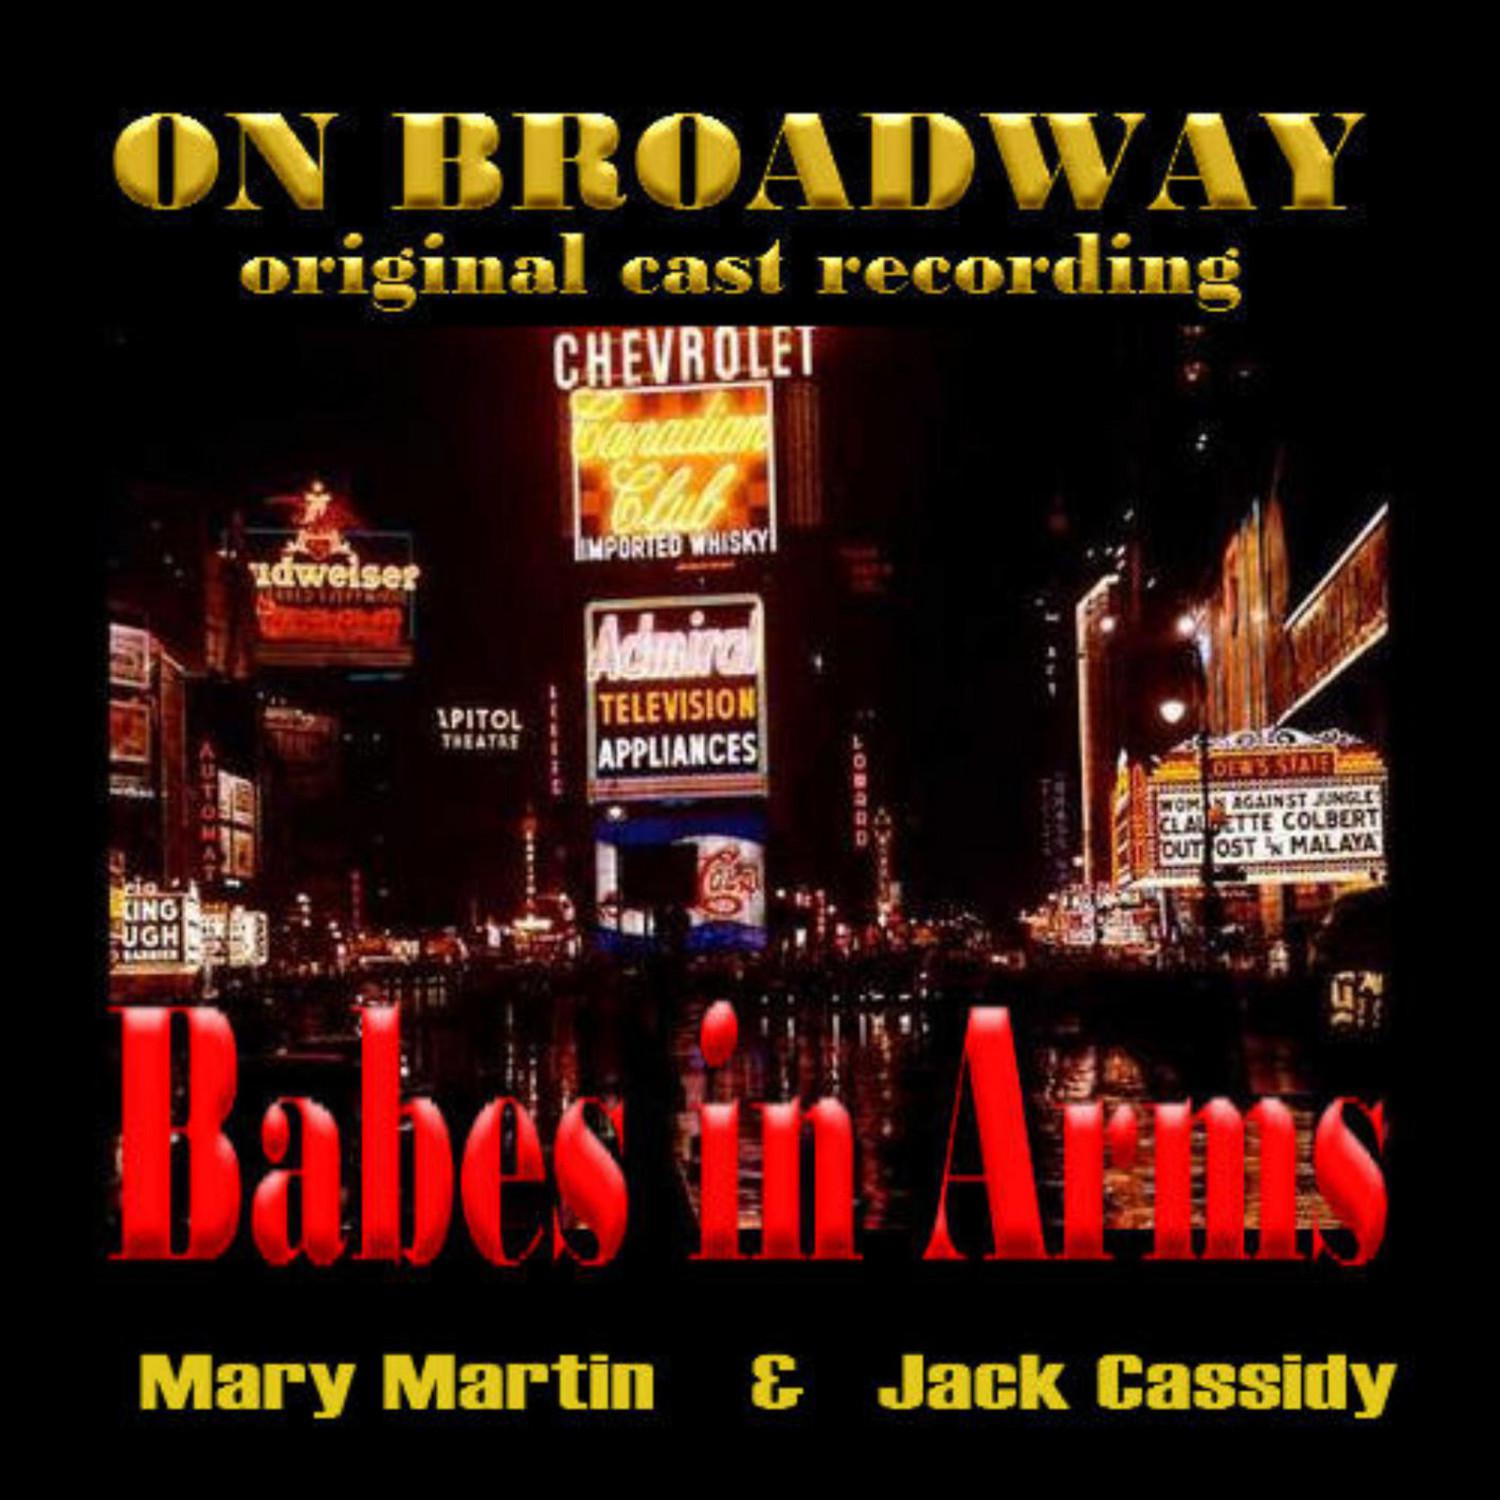 Babes in Arms On Broadway